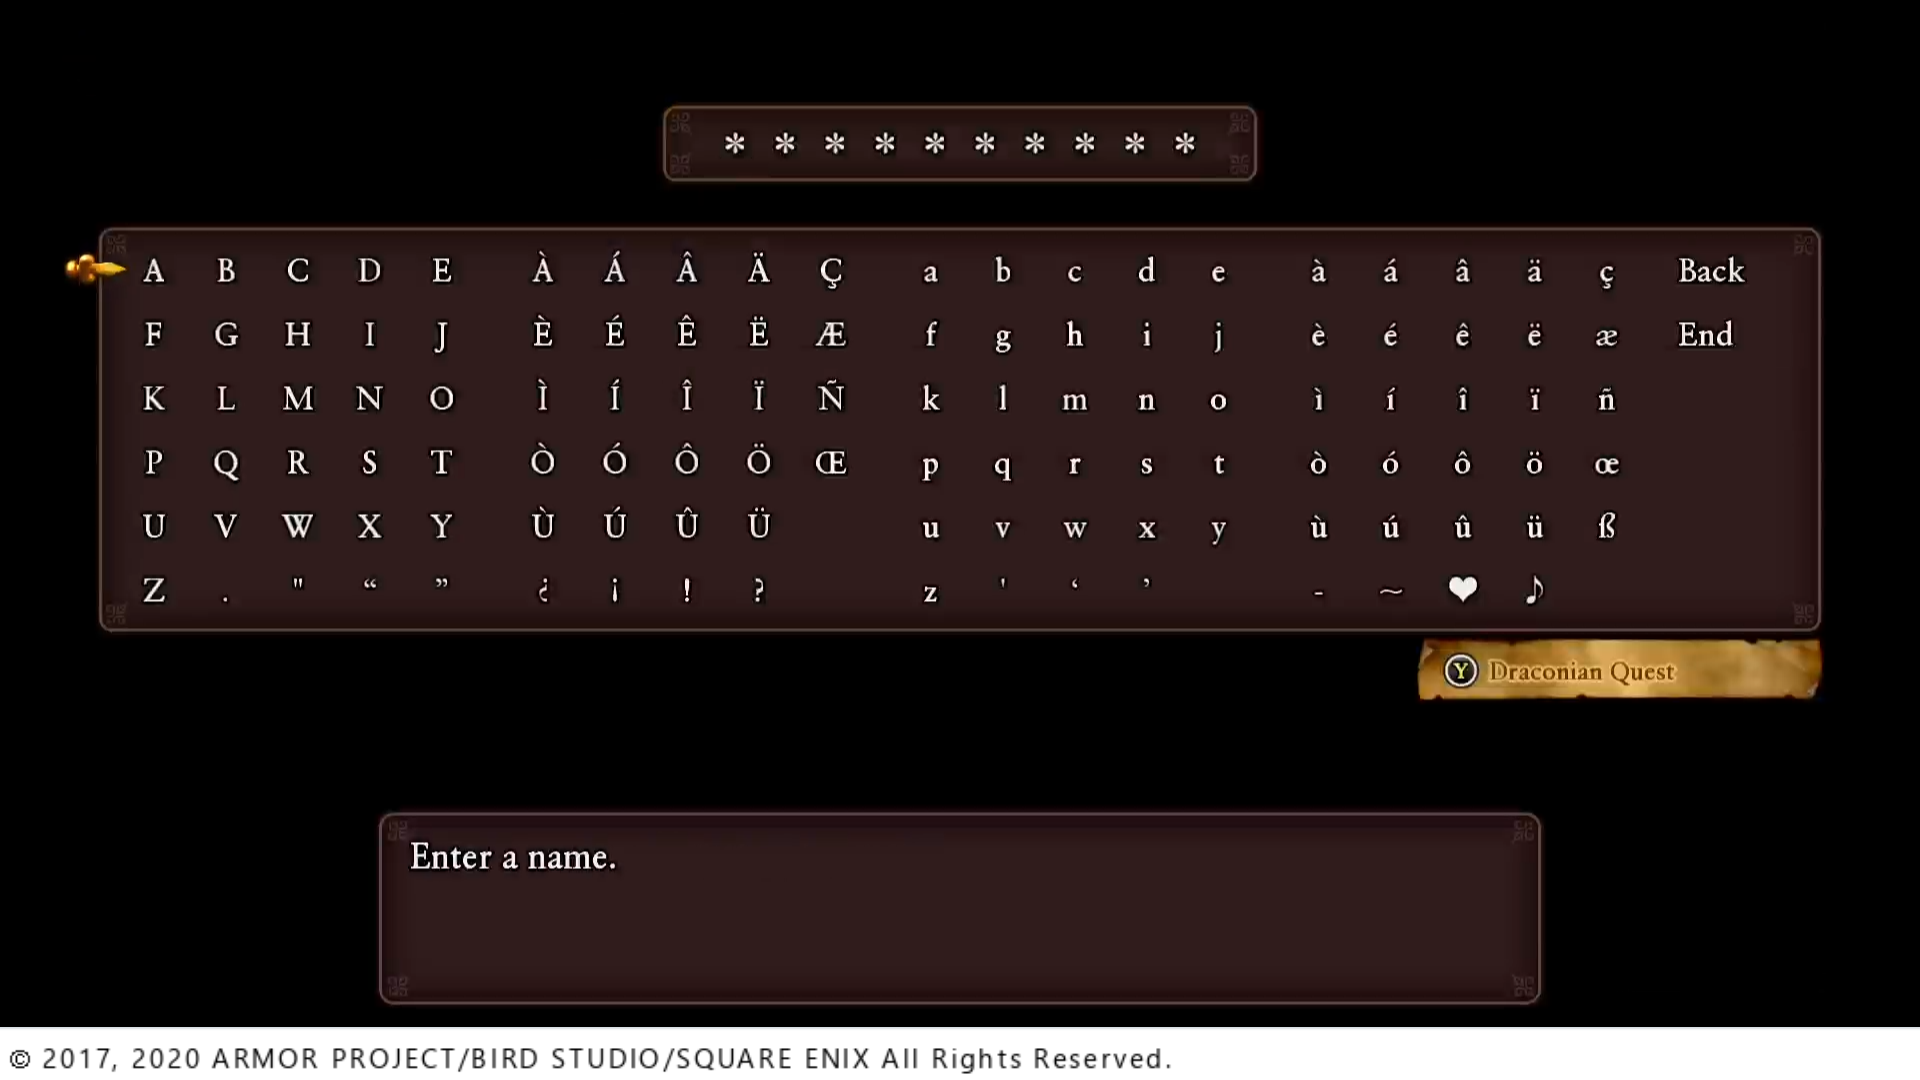 Dragon Quest XI S: Echoes of an Elusive Age screen shot of character naming screen with asterisk placeholders for each letter space allowed for the name. Copyright on the bottom says "2017, 2020 Armor Project / Bird Studio / Square Enix All Rights Reserved.